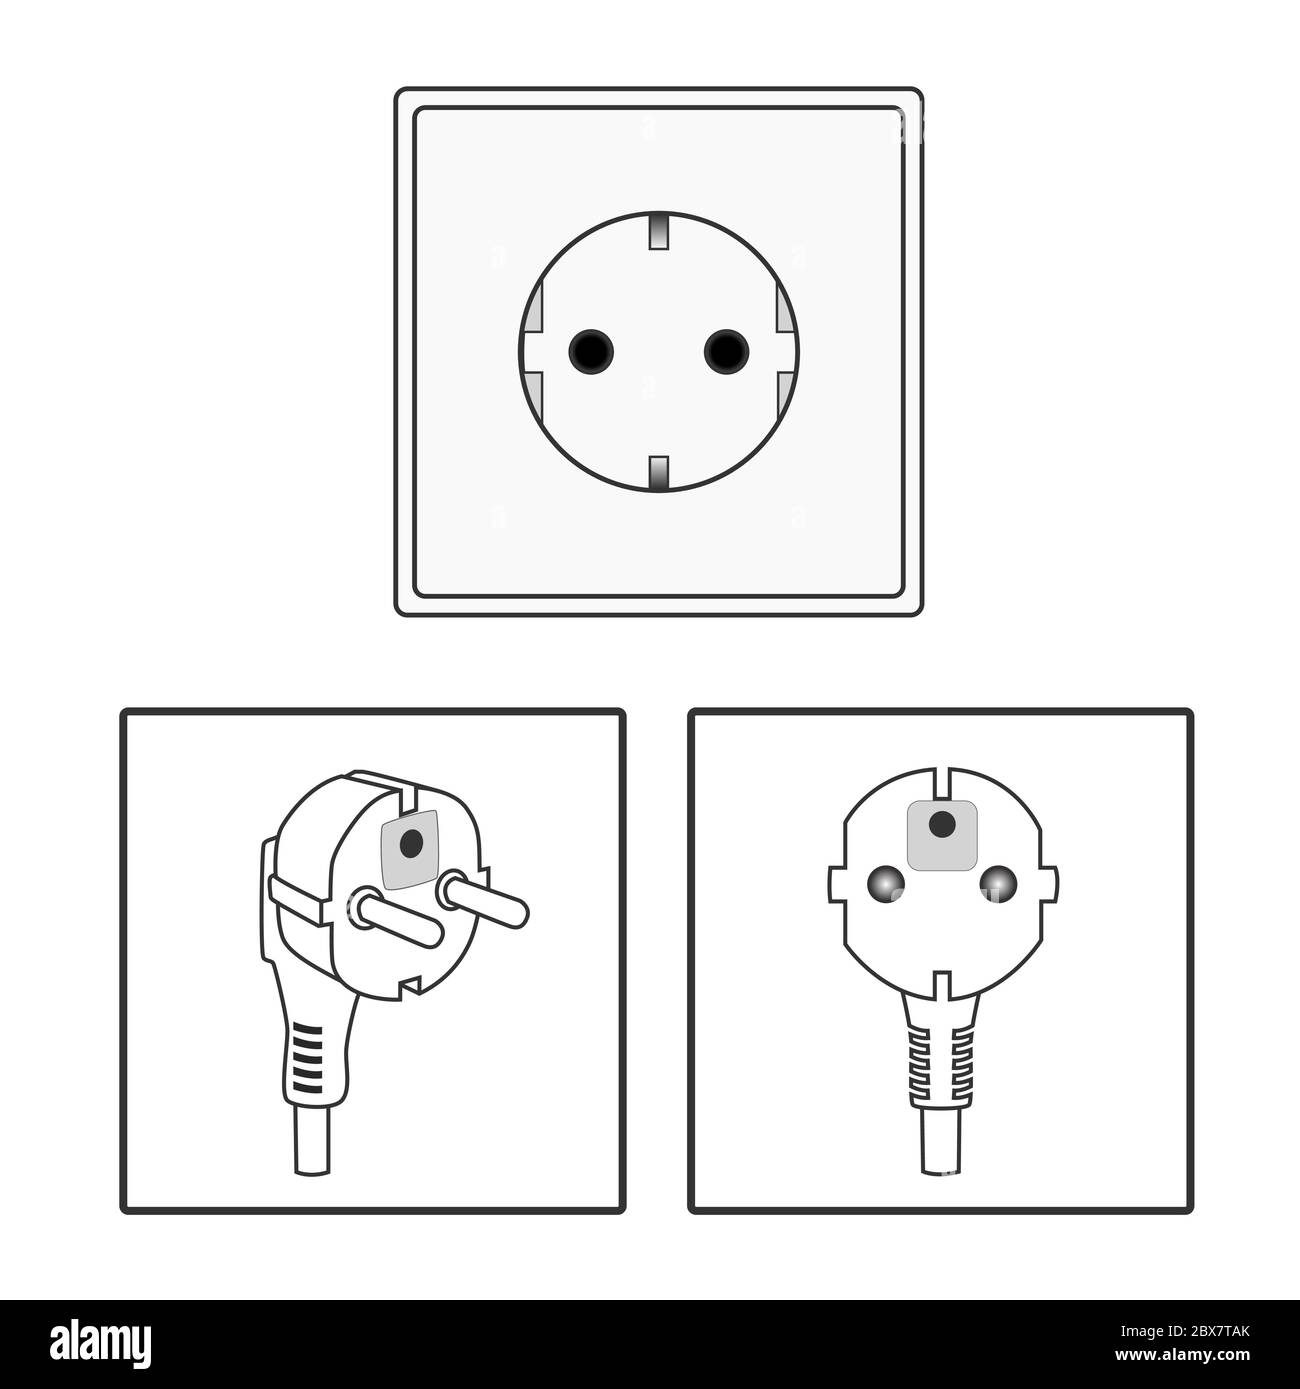 Euro socket and plug. Icon set. Two 2 pin socket sheme isolated vector graphic illustration. simple diagram electrical appliance plug Stock Vector